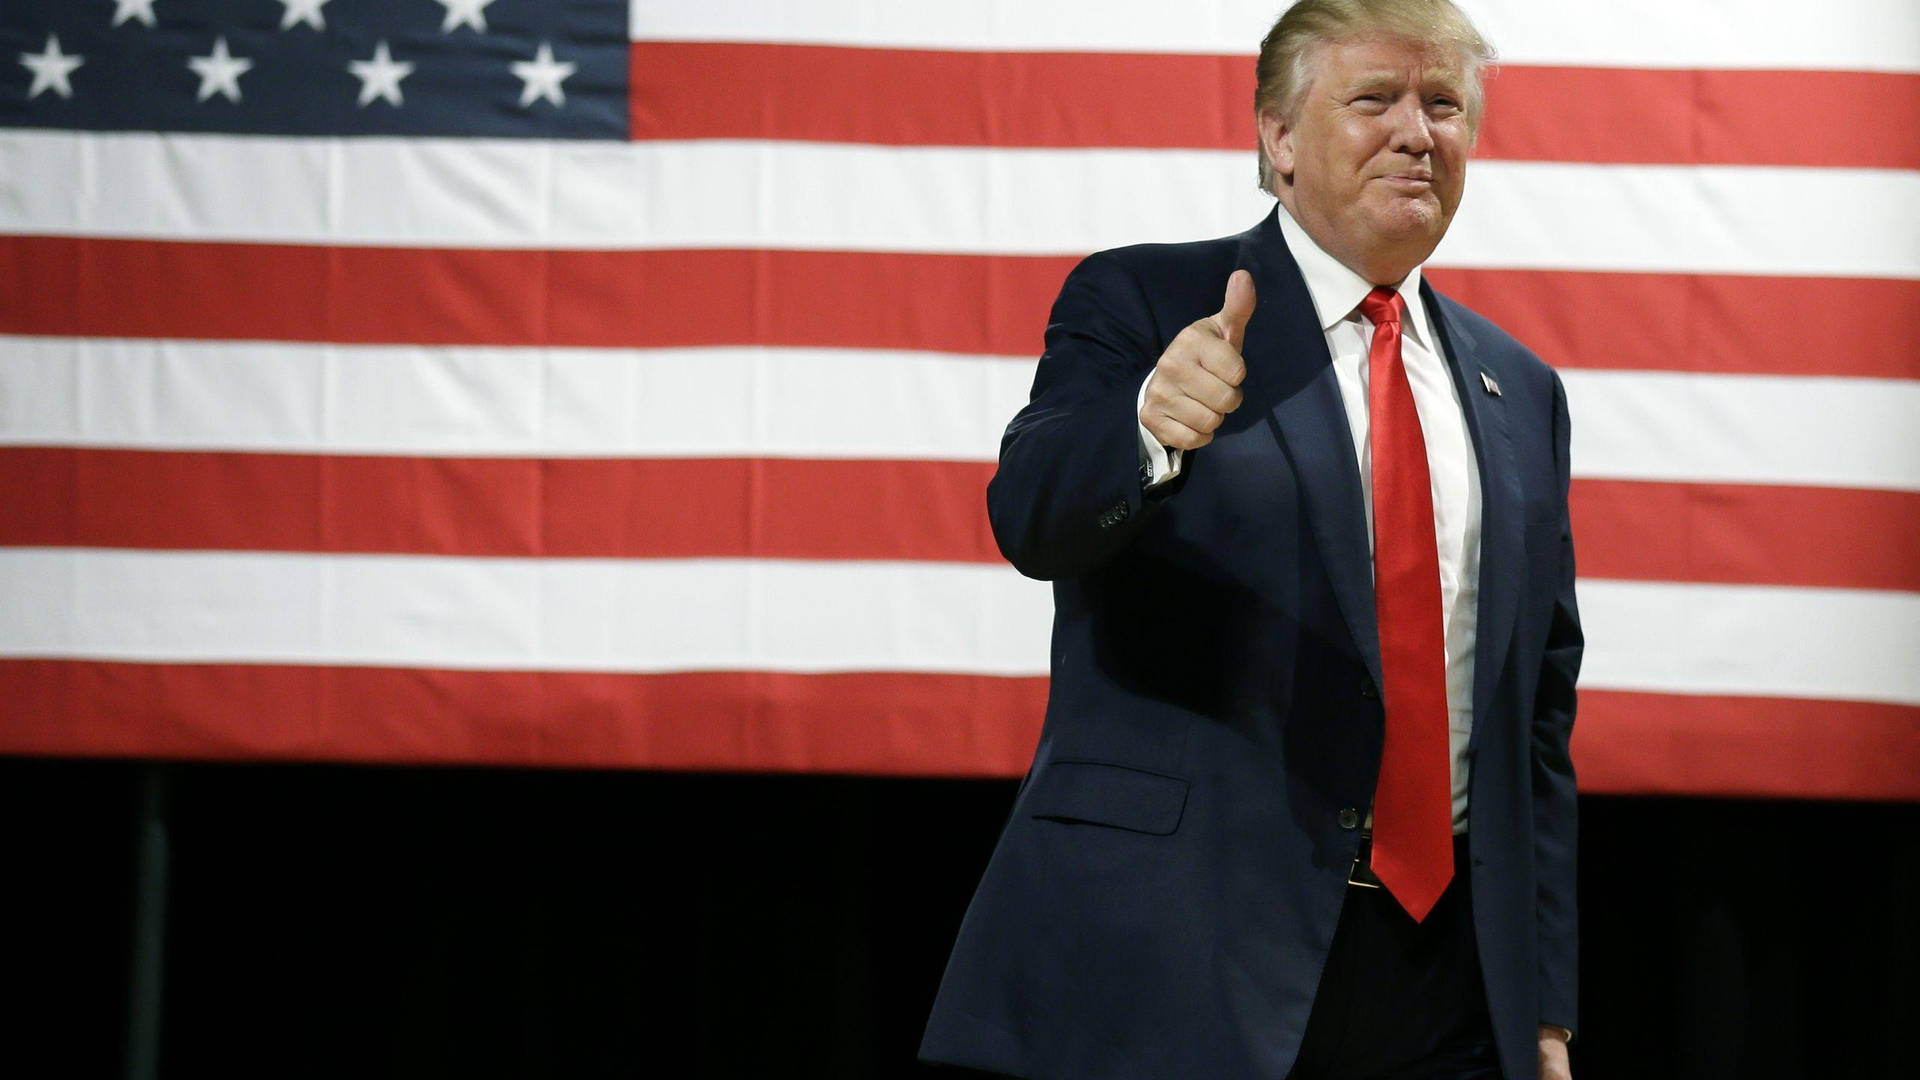 Donald Trump Confidently Raises His Thumb In Approval At The American Flag. Background